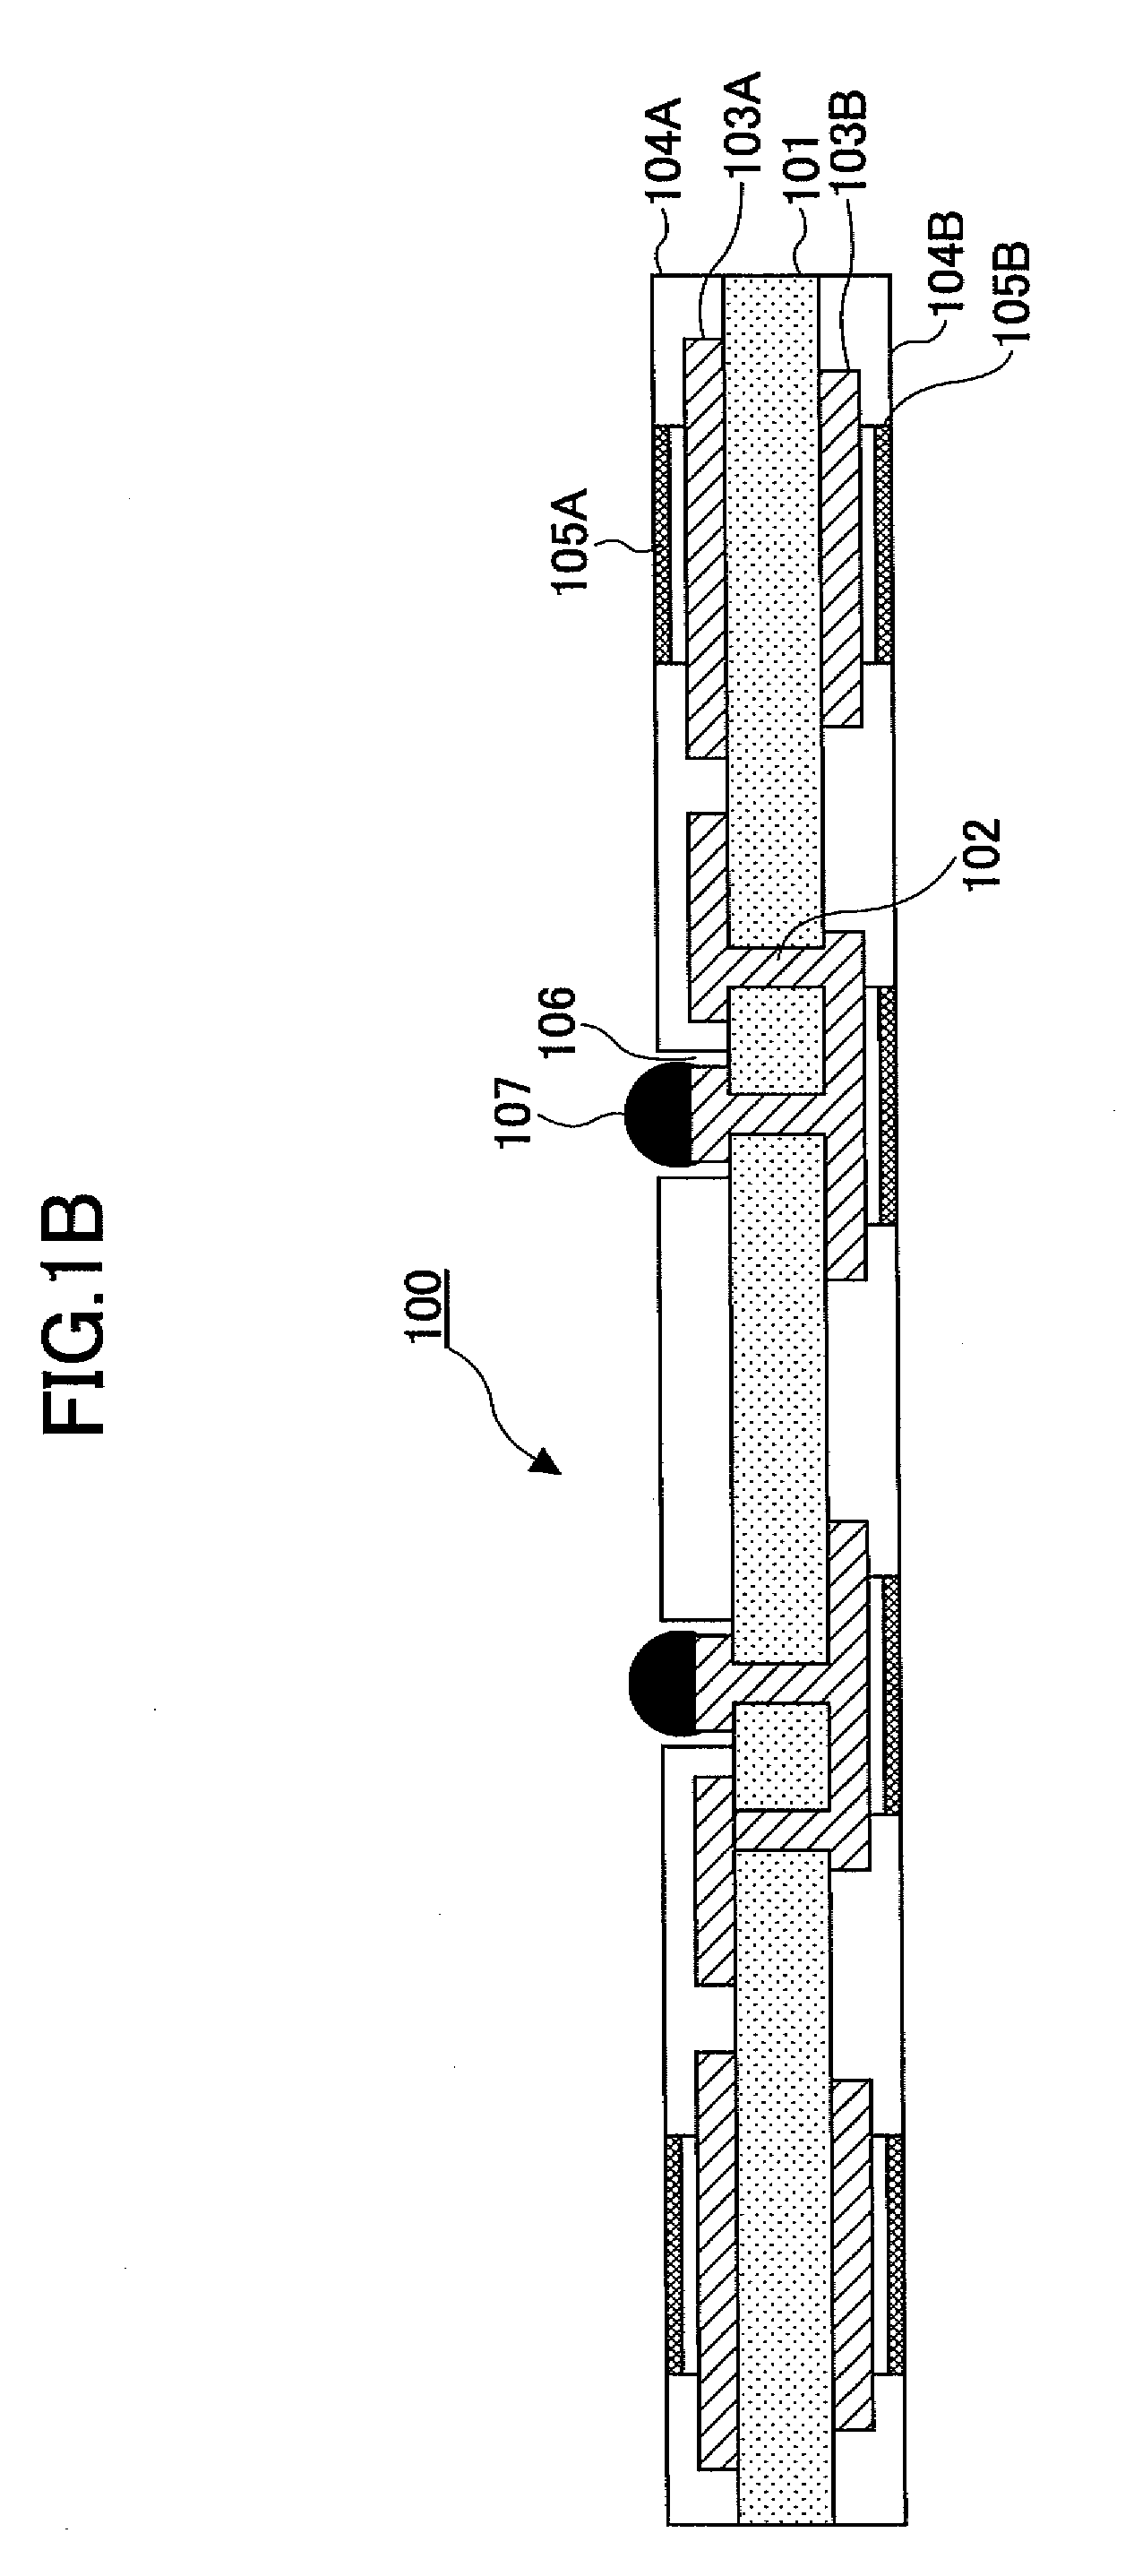 Chip embedded substrate and method of producing the same